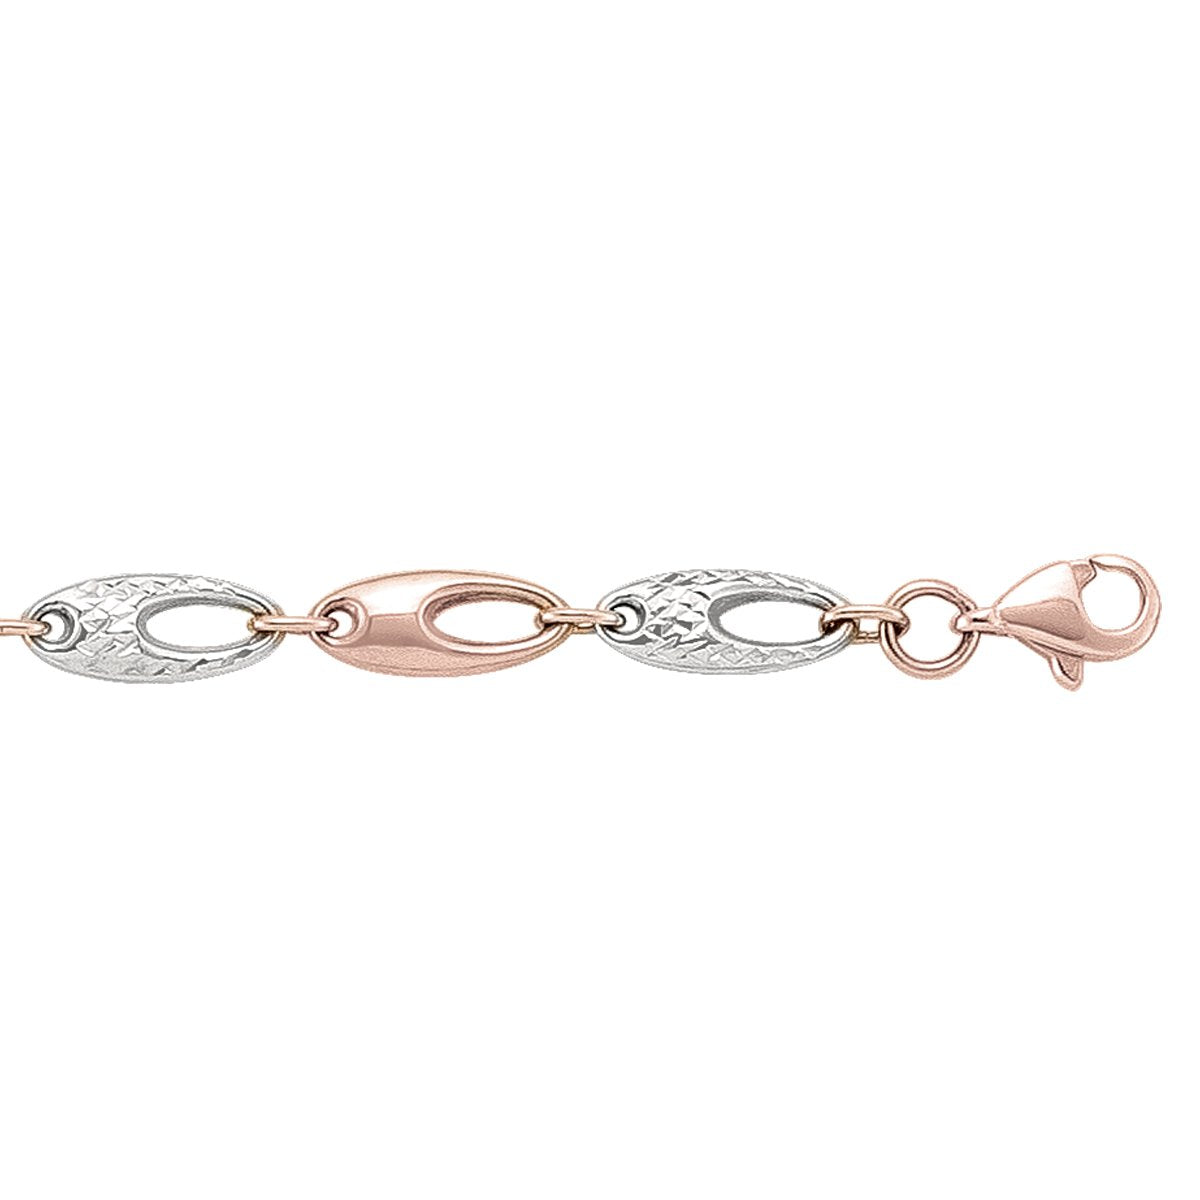 LADIES BRACELETS PINK AND WHITE GOLD FANCY HOLLOW 